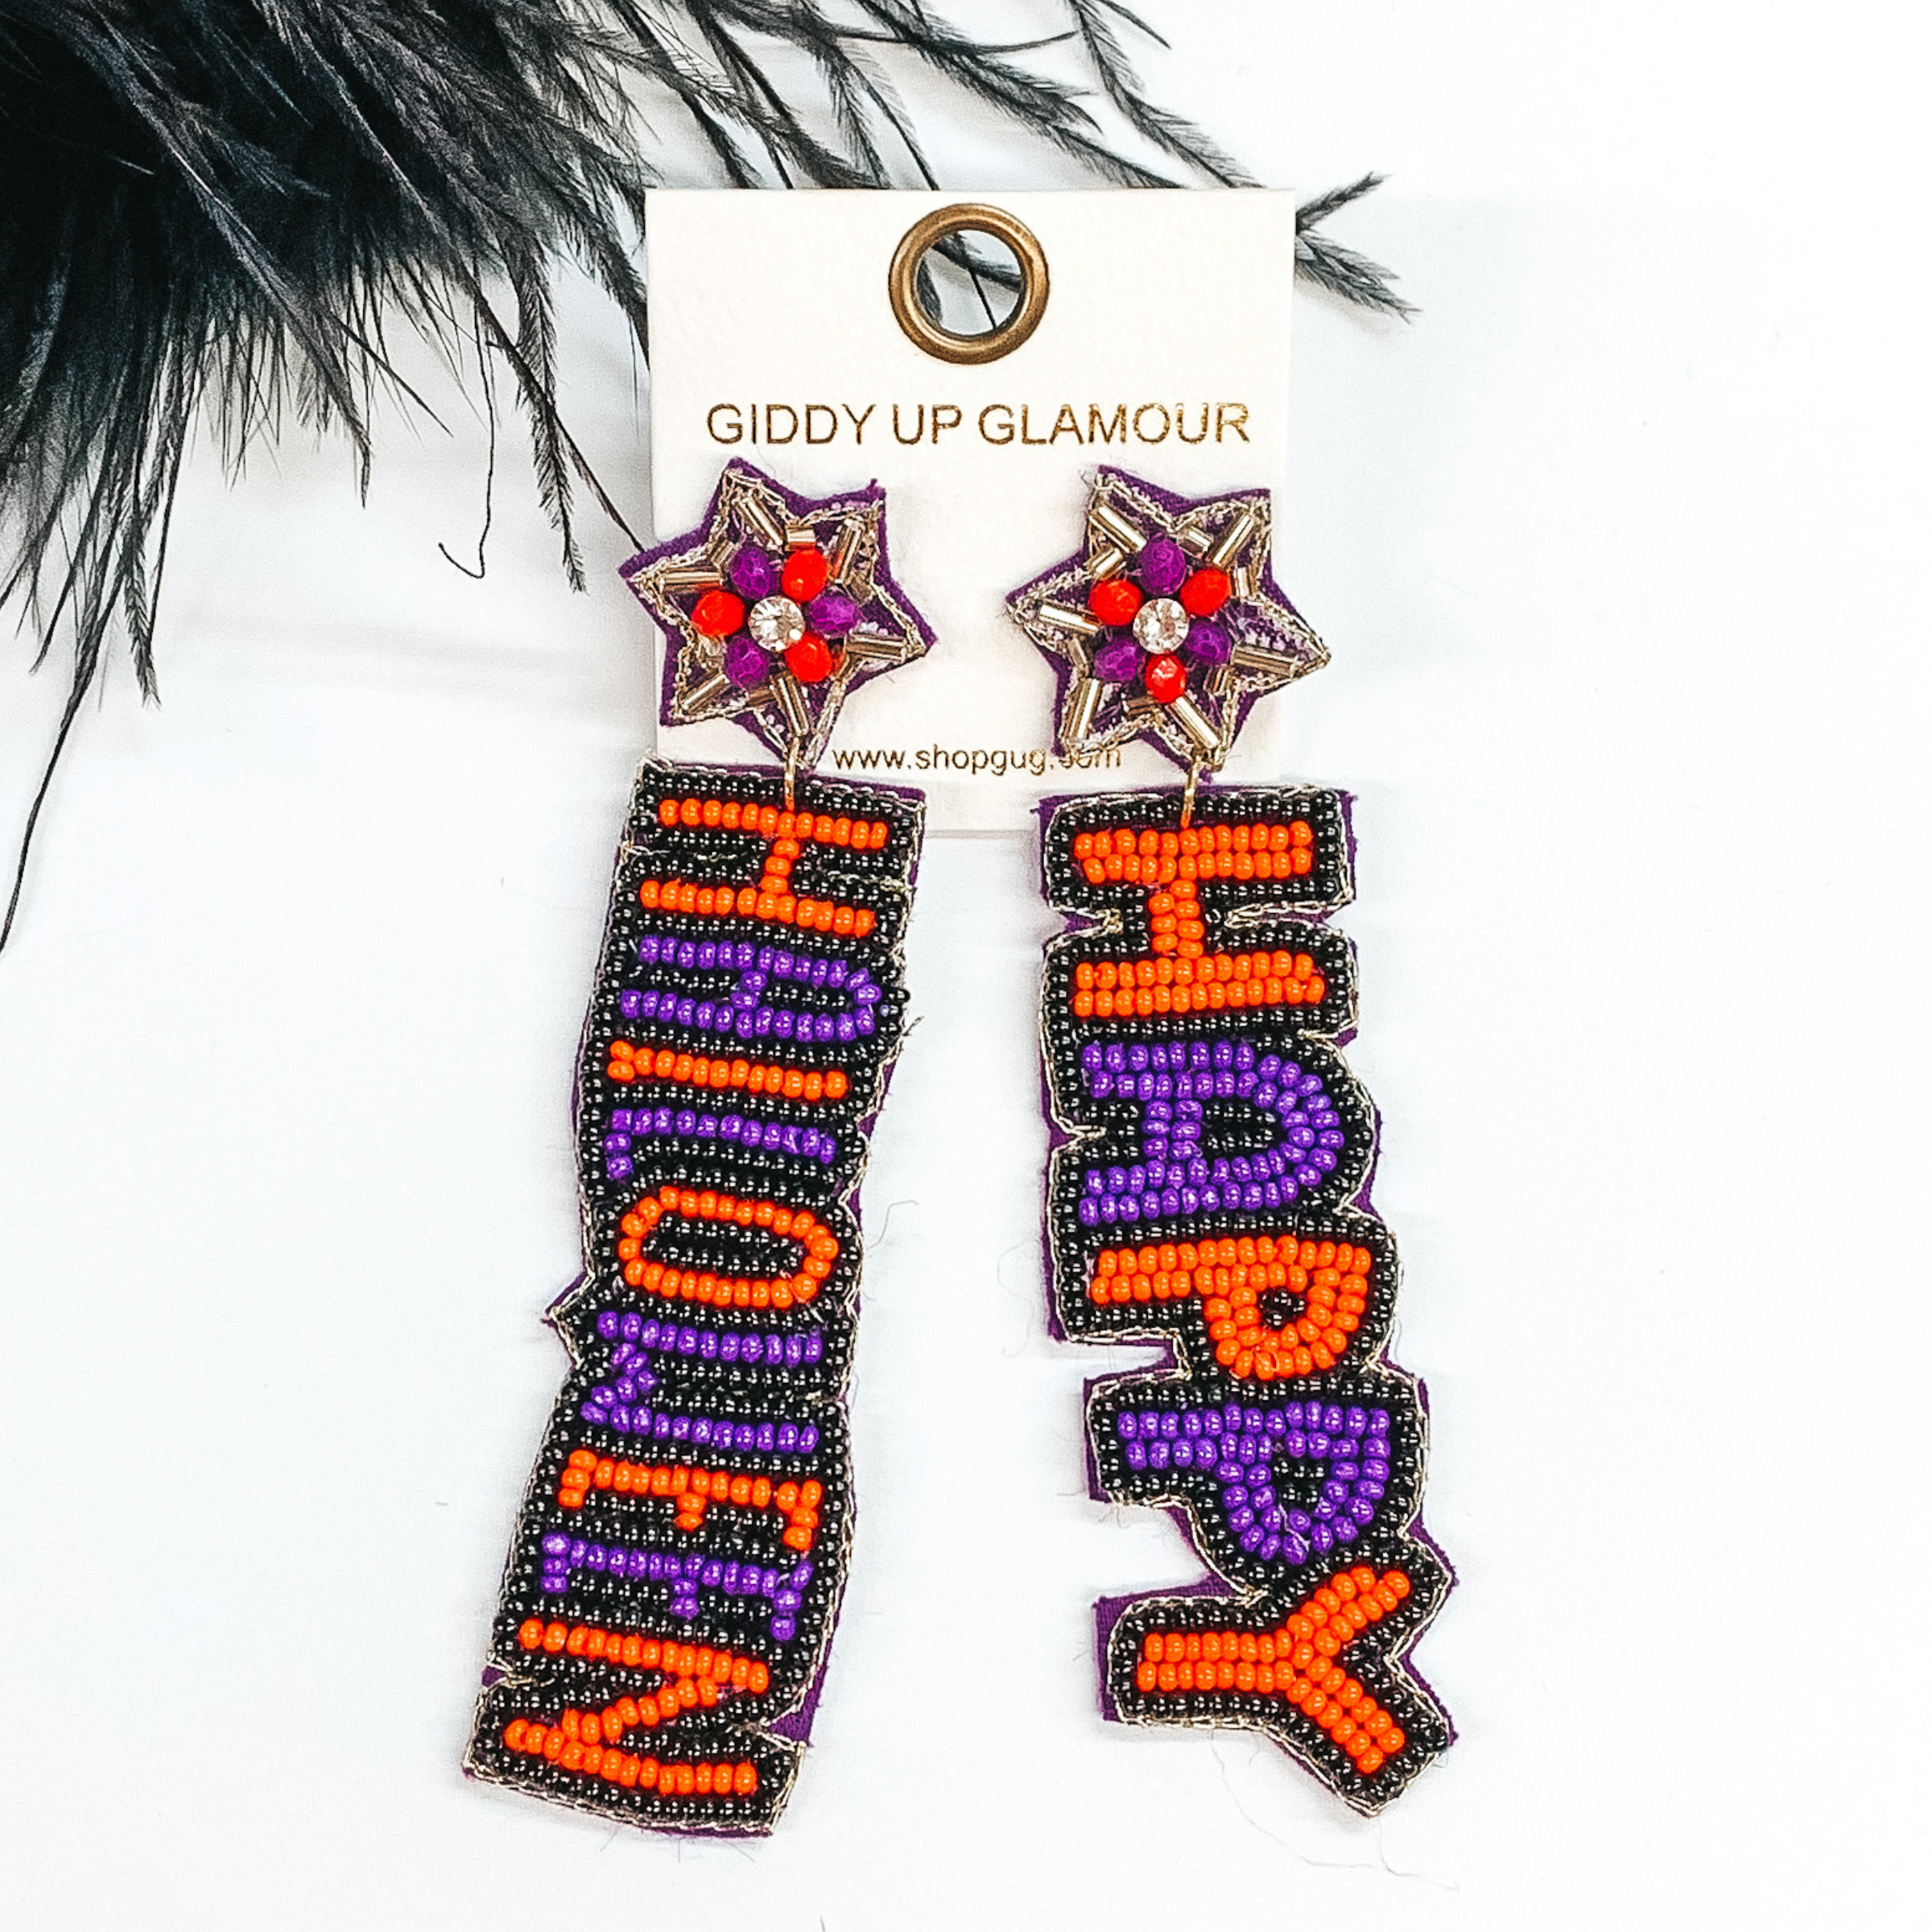 Star shaped post back earrings with  hanging beaded words. The words are "HAPPY" anf "HALLOWEEN" in orange and purple beads with a black beaded outline. These earrings are pictured on a white background with black feathers at the top. 